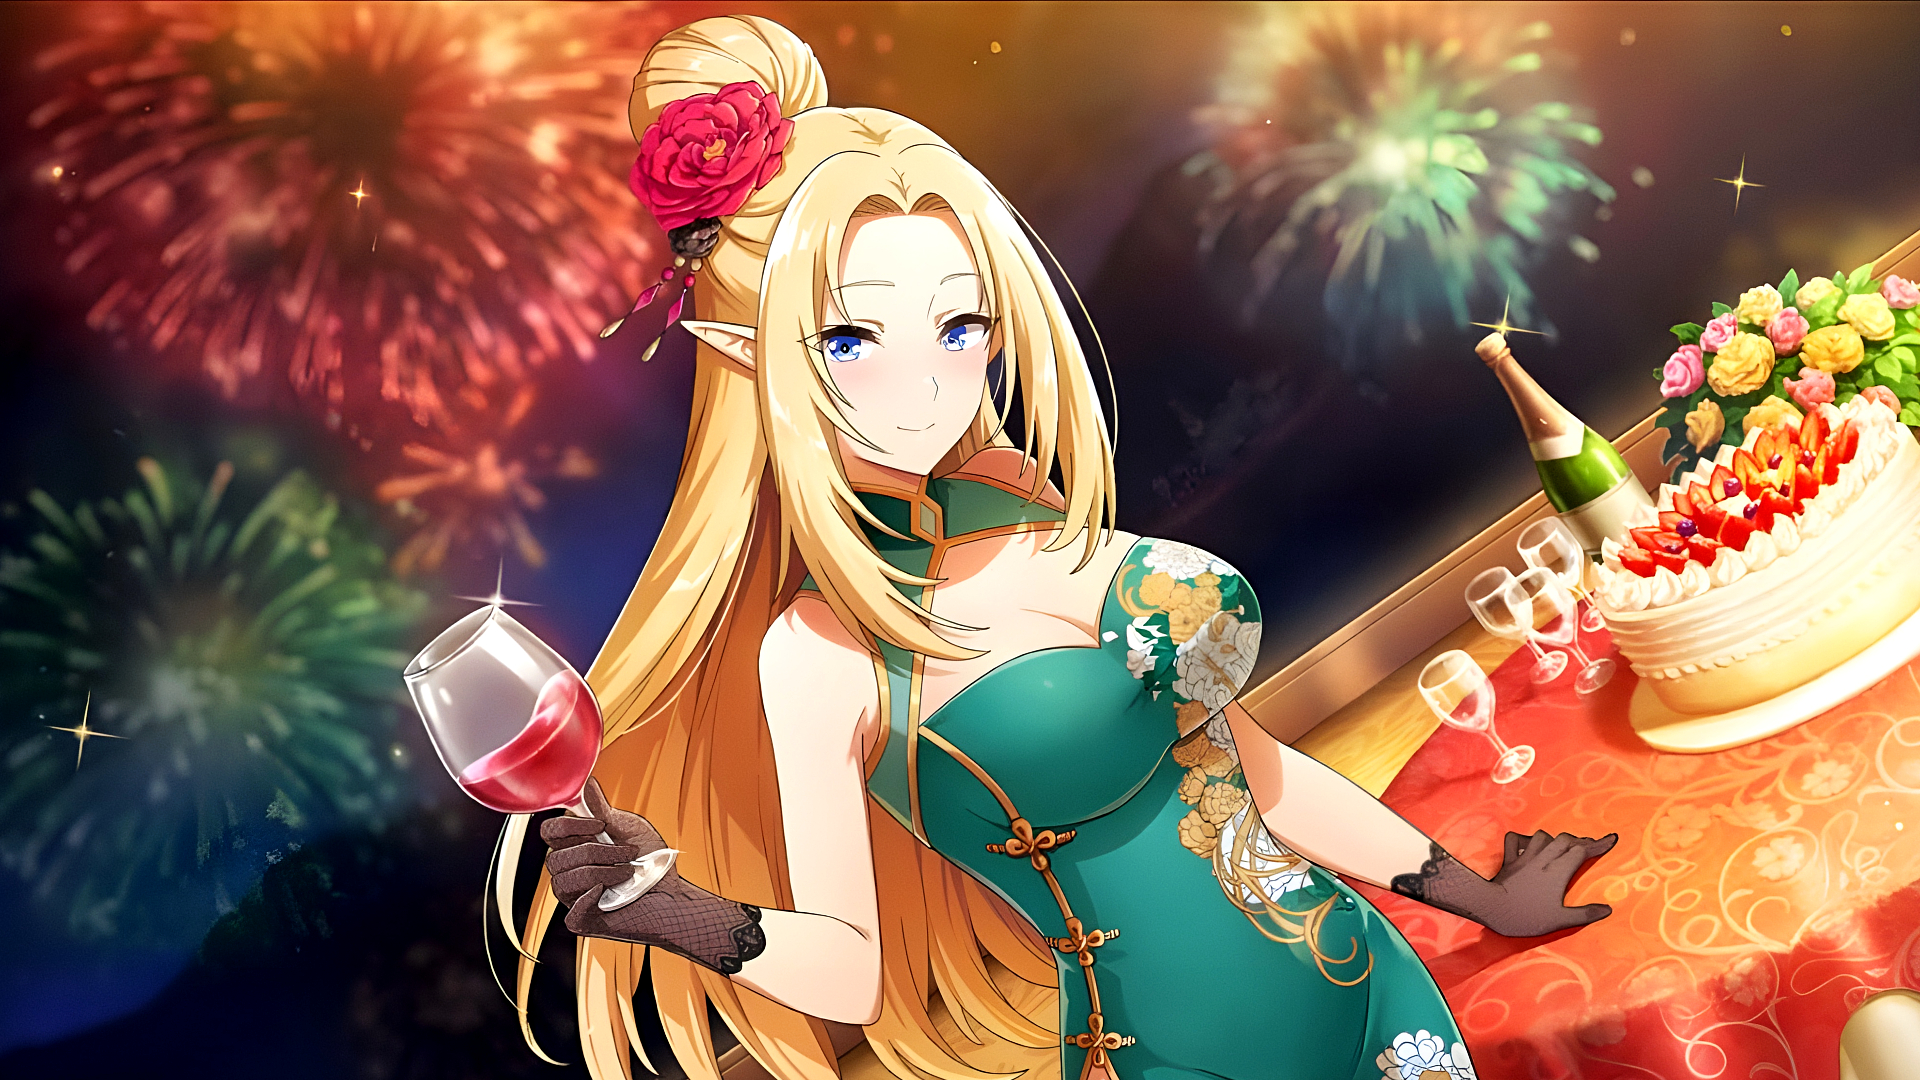 Anime 1920x1080 The Eminence in Shadow anime Shadow Garden chinese dress fireworks Alpha looking at viewer cleavage cutout drink cleavage long hair flower in hair blonde blue eyes pointy ears big boobs drinking glass gloves cake table flowers bottles sky night mountains closed mouth smiling blushing wine stars